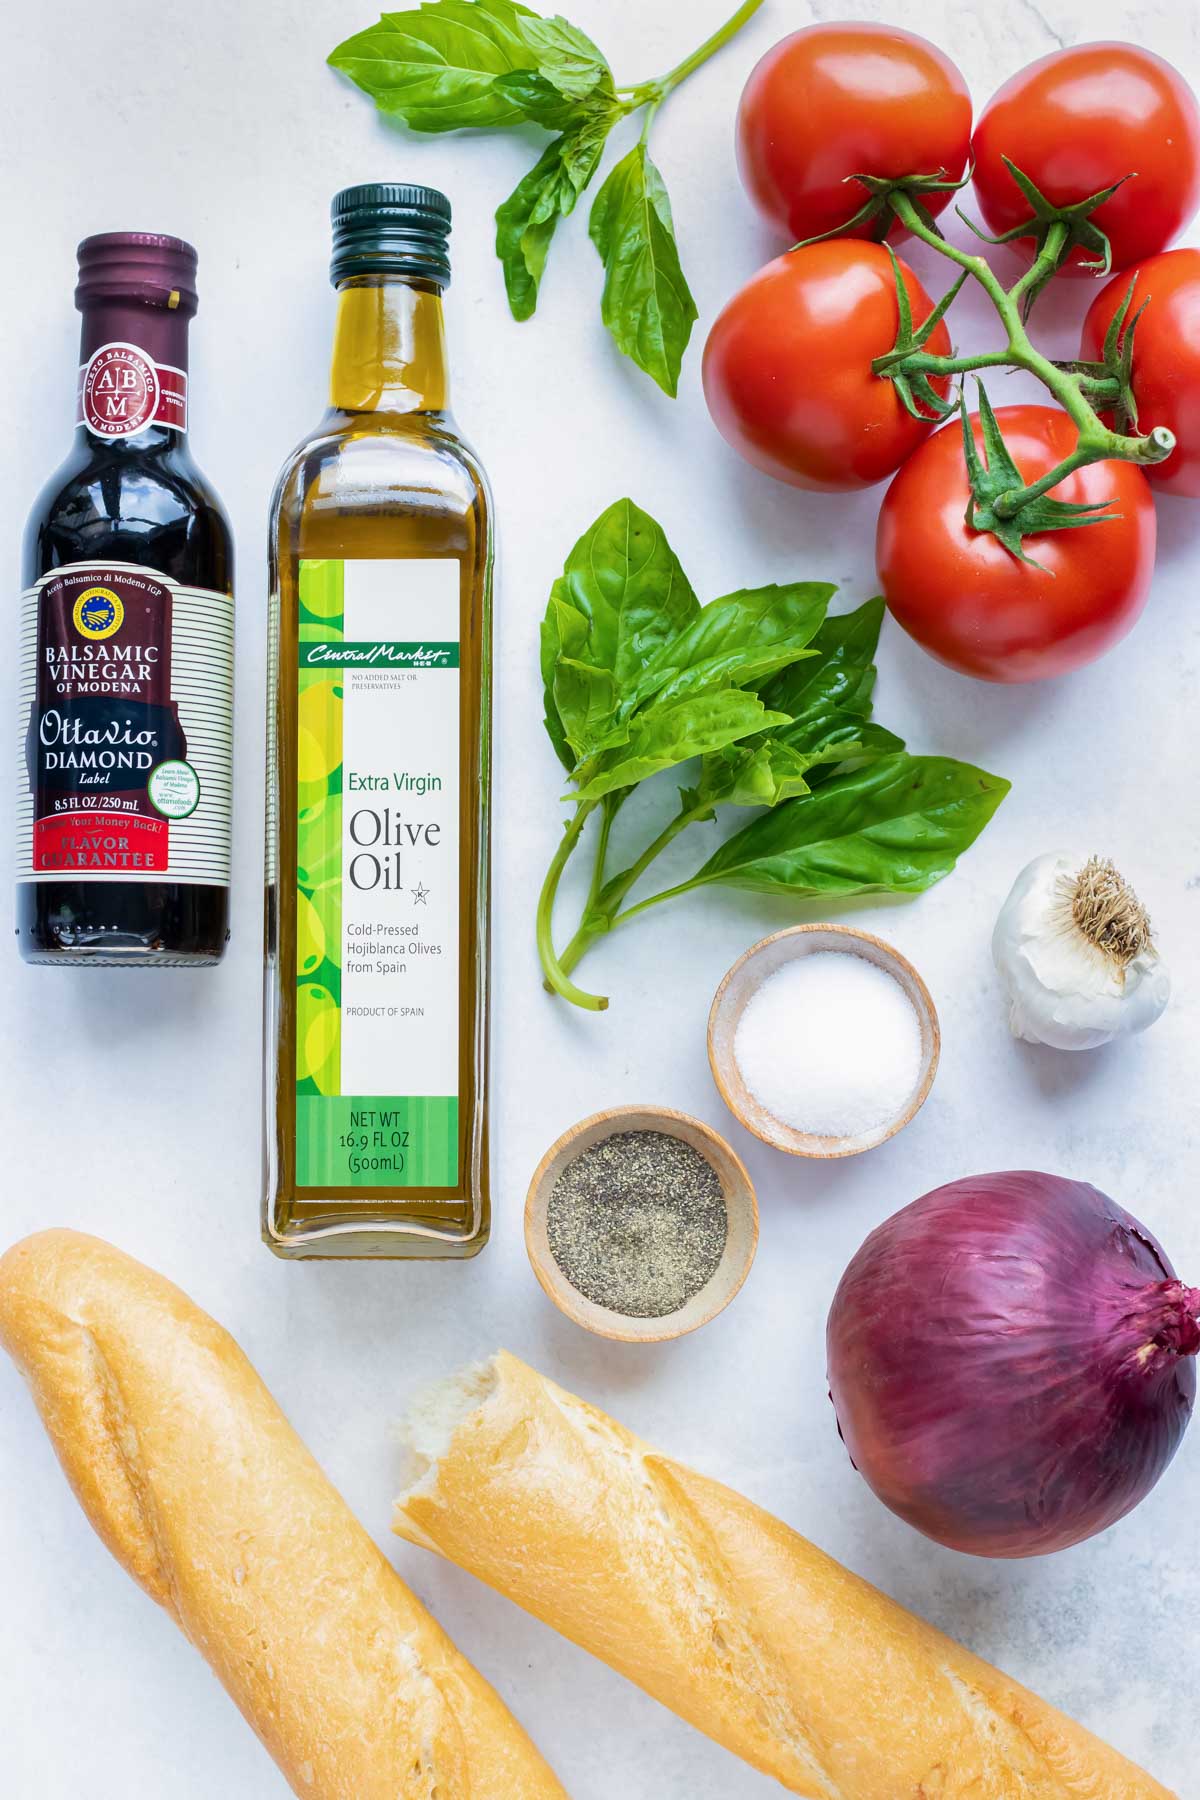 Campari vine-ripened tomatoes, olive oil, basil, balsamic vinegar, onion, and bread as the ingredients for an easy homemade bruschetta recipe.